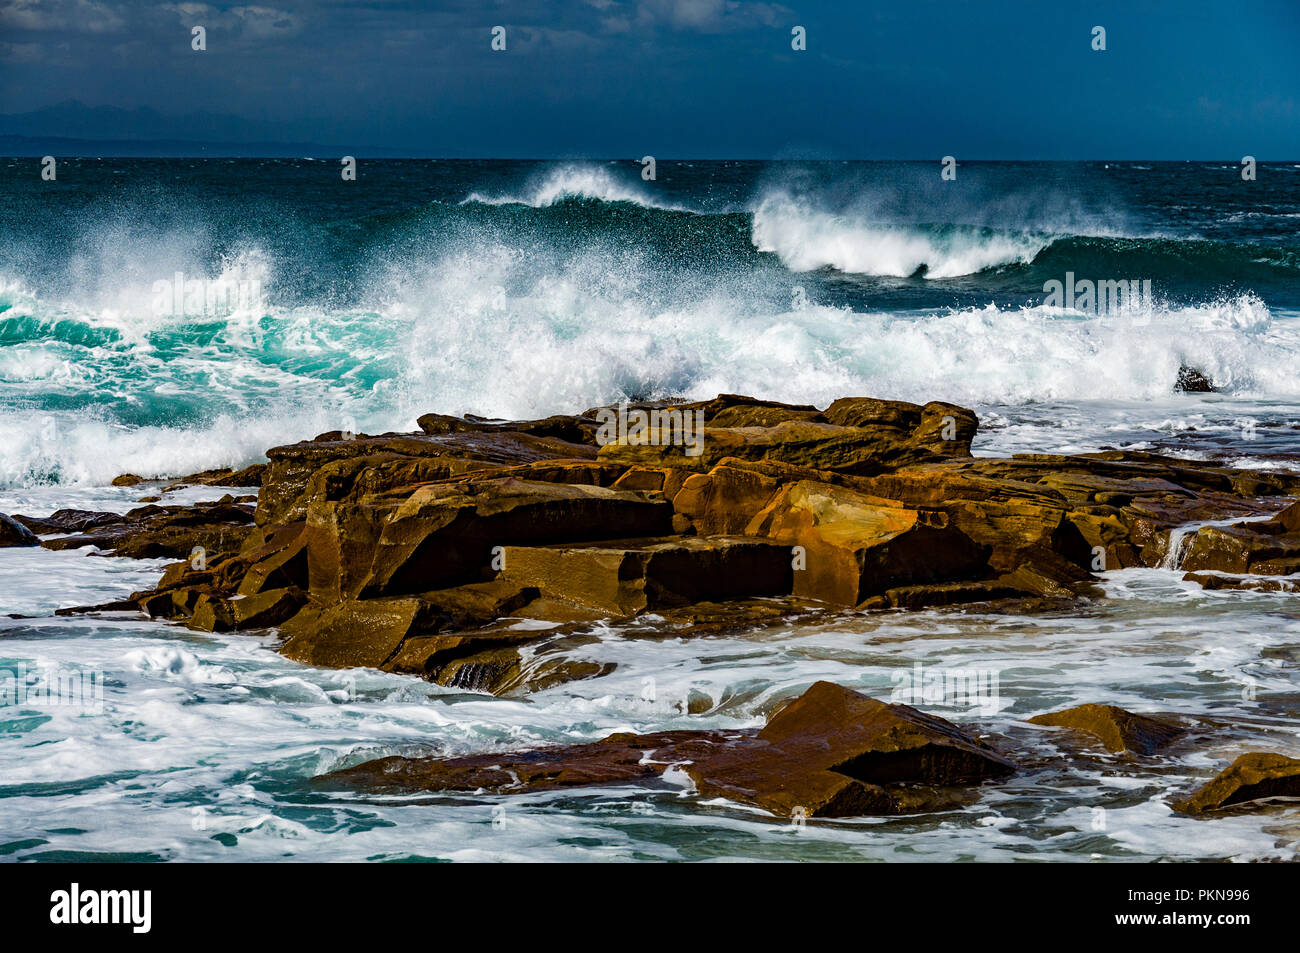 Medium waves crashing on brown rocks in the South Atlantic, South Africa Stock Photo